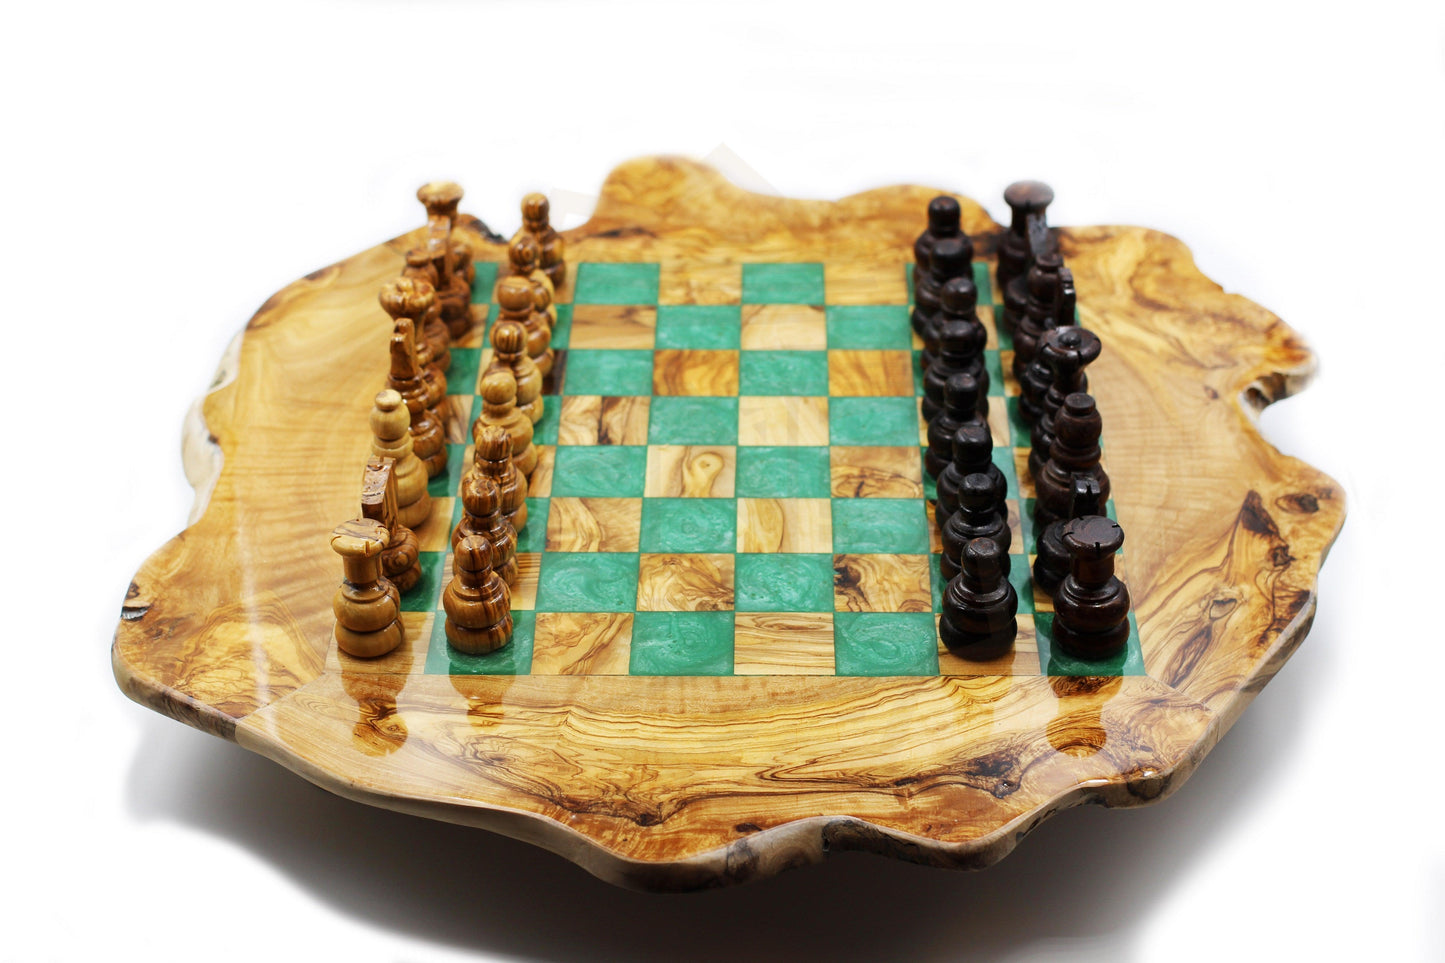 Luxurious olive wood chess set with resin finish